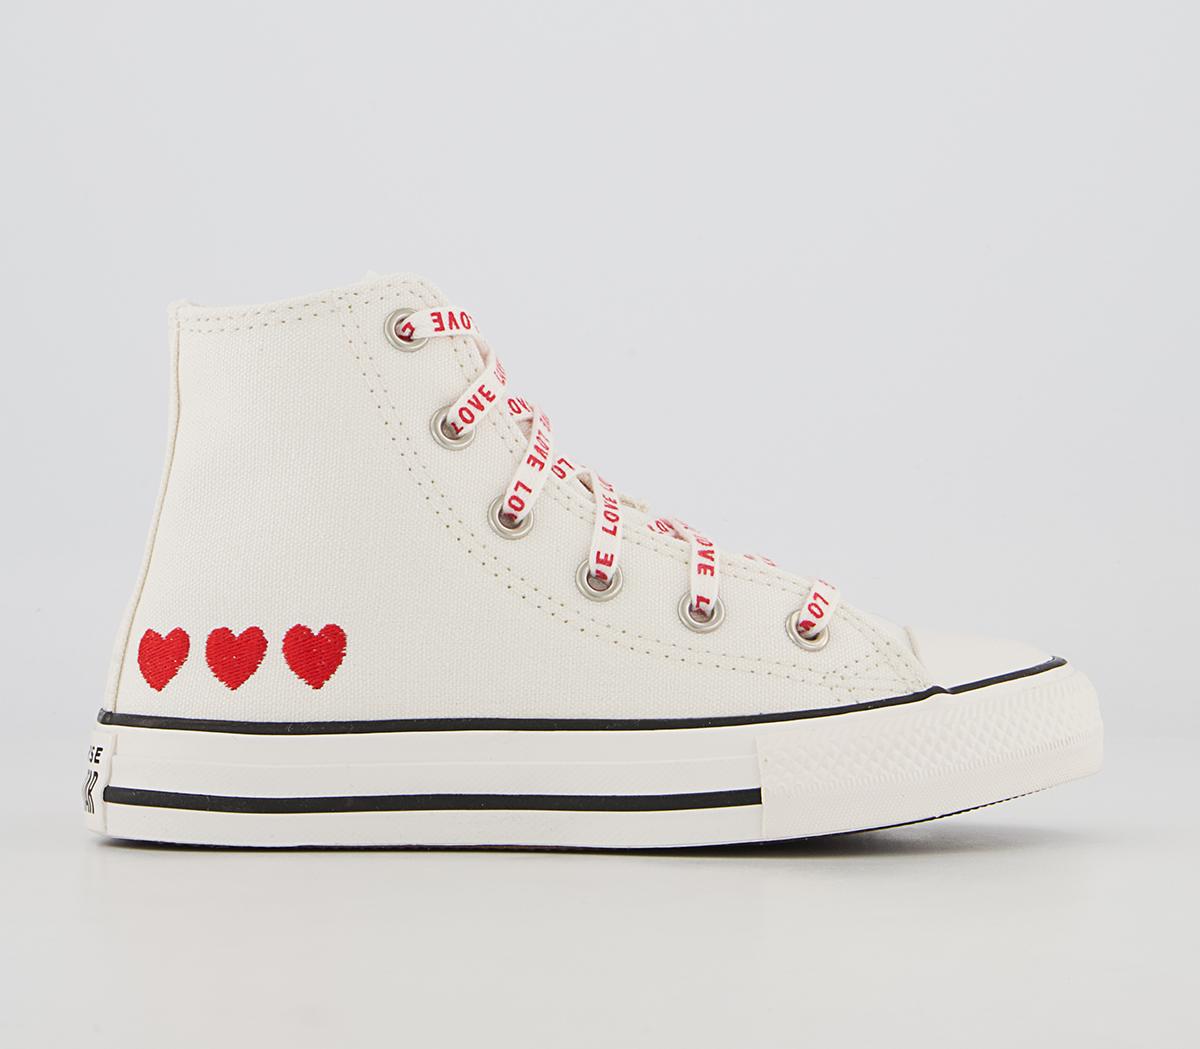 ConverseAll Star Hi Youth TrainersVintage White University Red Black Heart